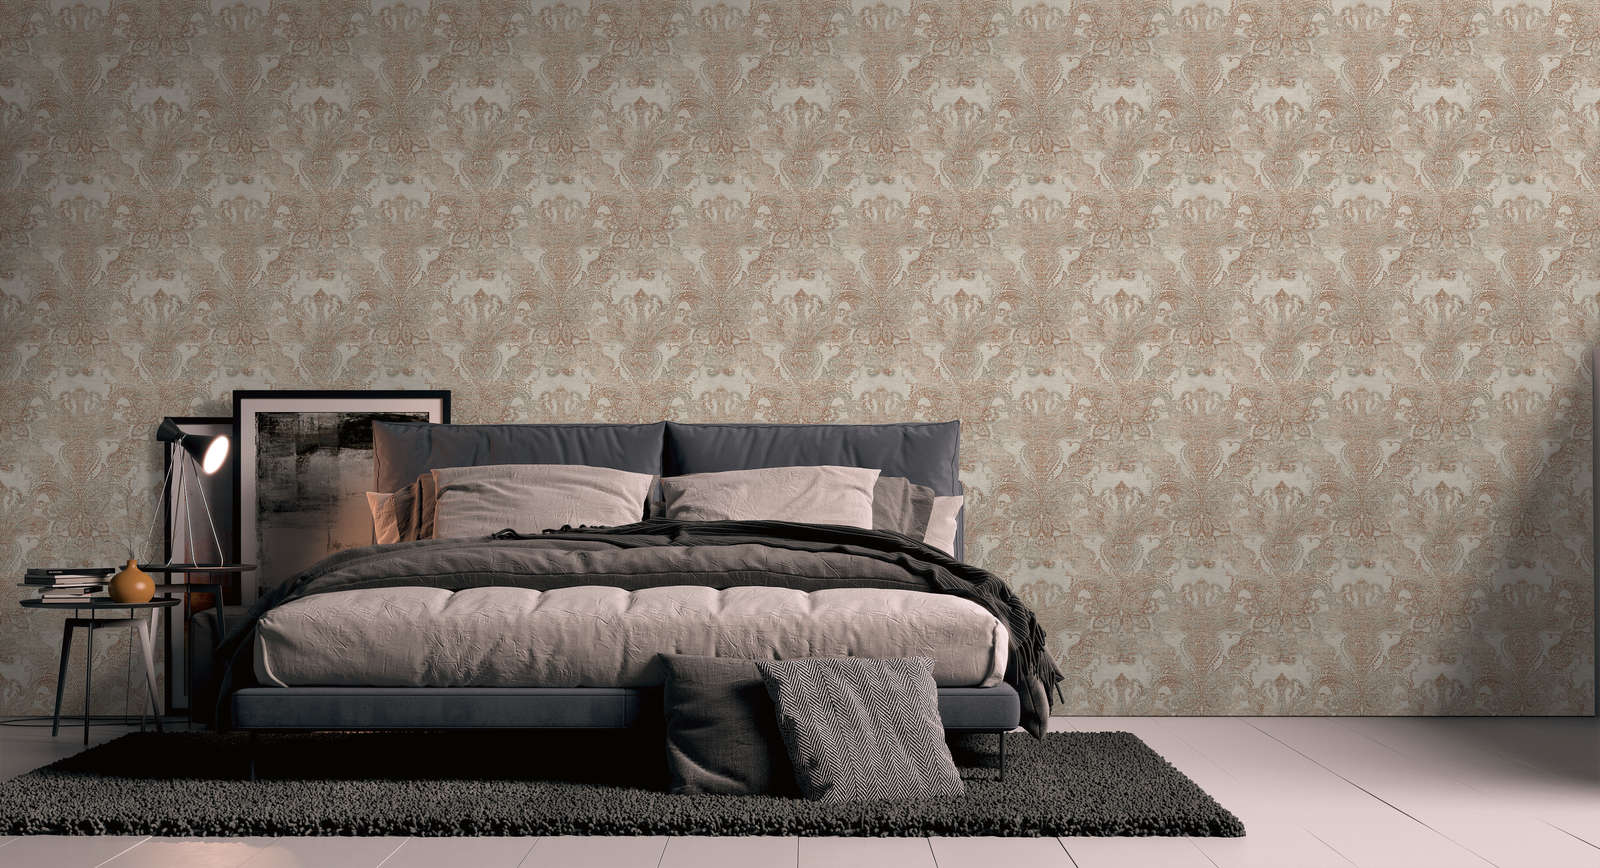             Classic baroque wallpaper with ornaments - beige, grey, reddish brown
        